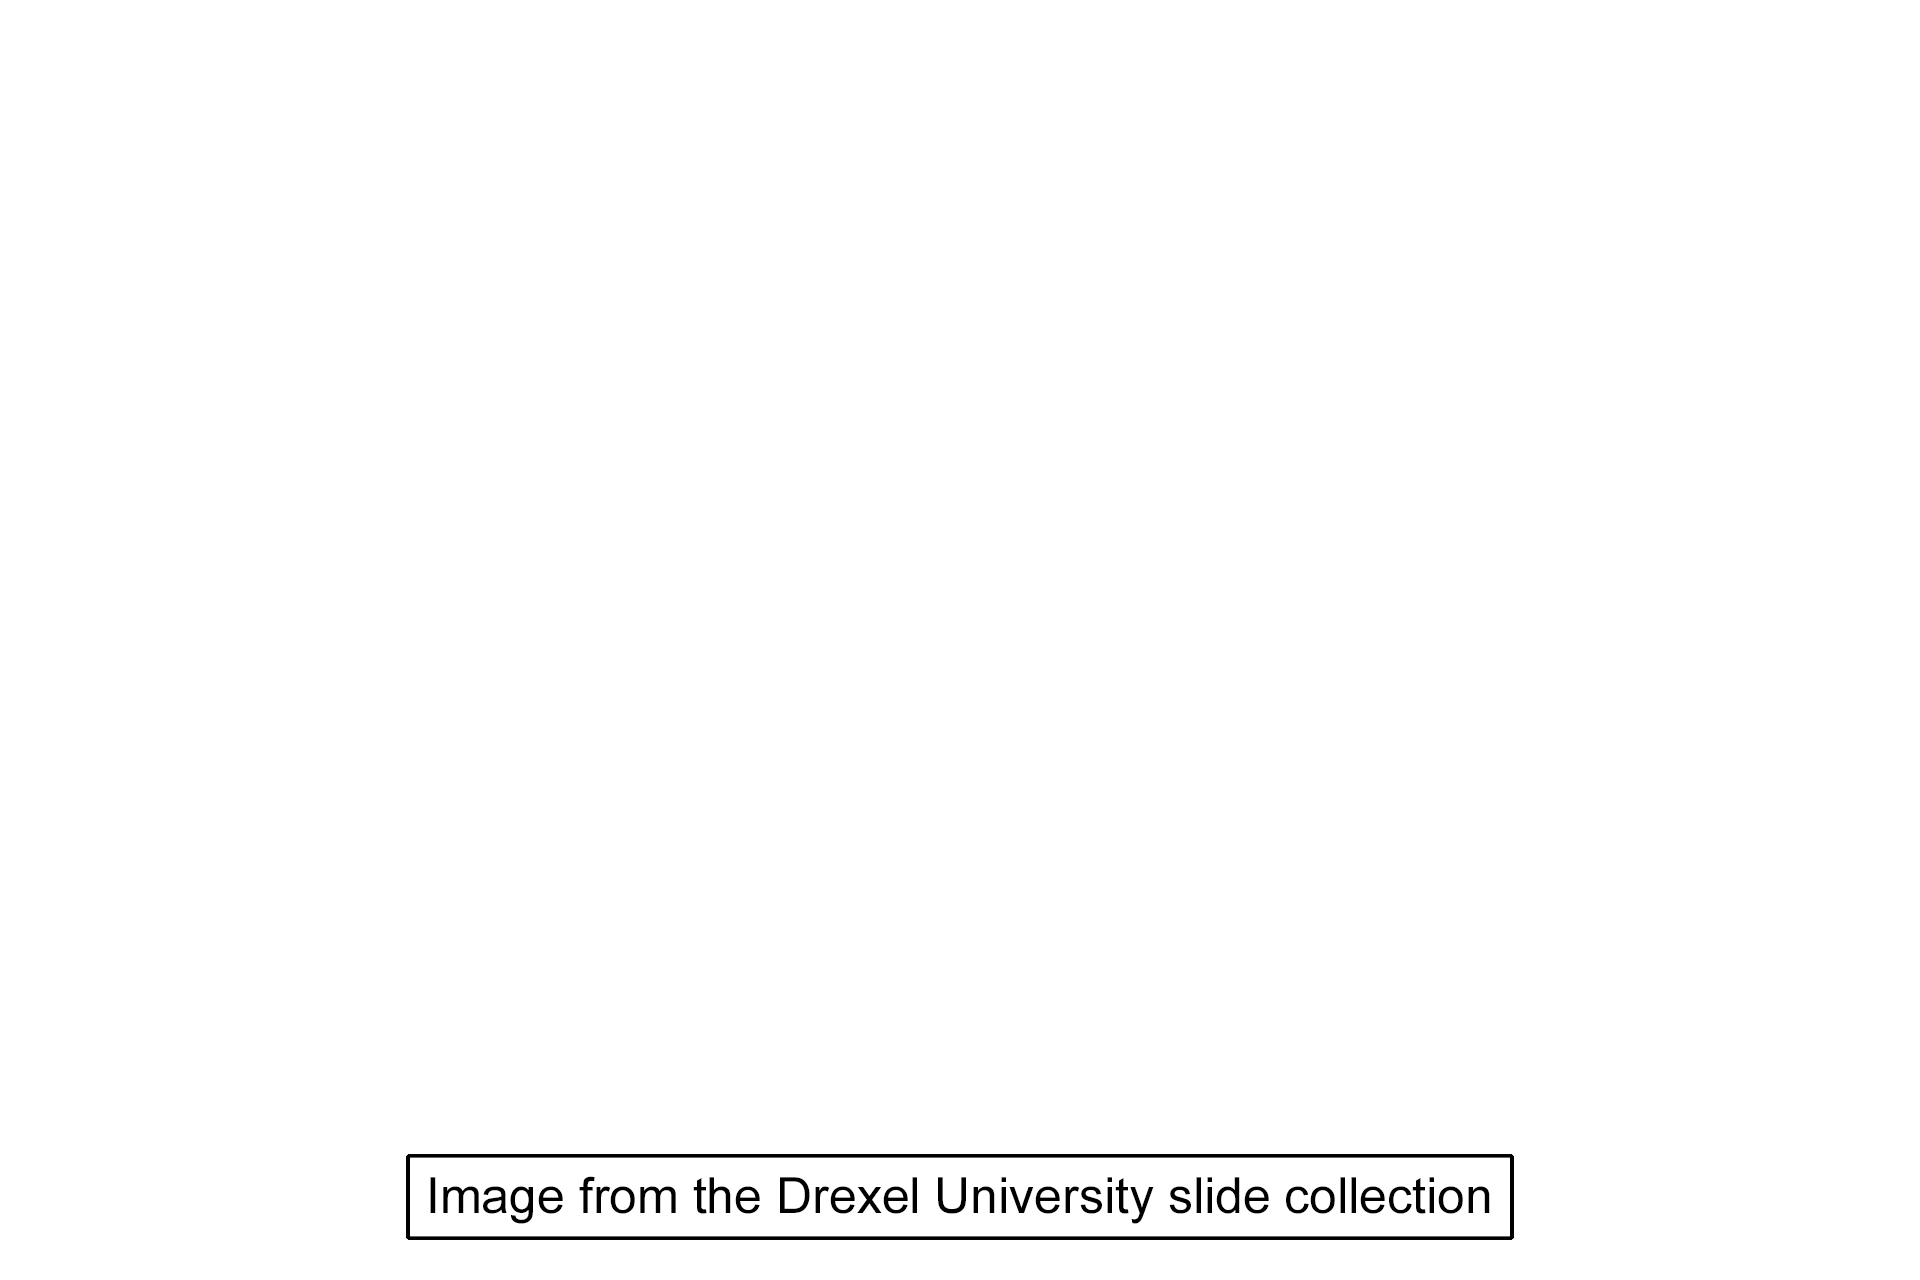 Image source > <p>This image was taken of a slide from the Drexel University slide collection.</p>
